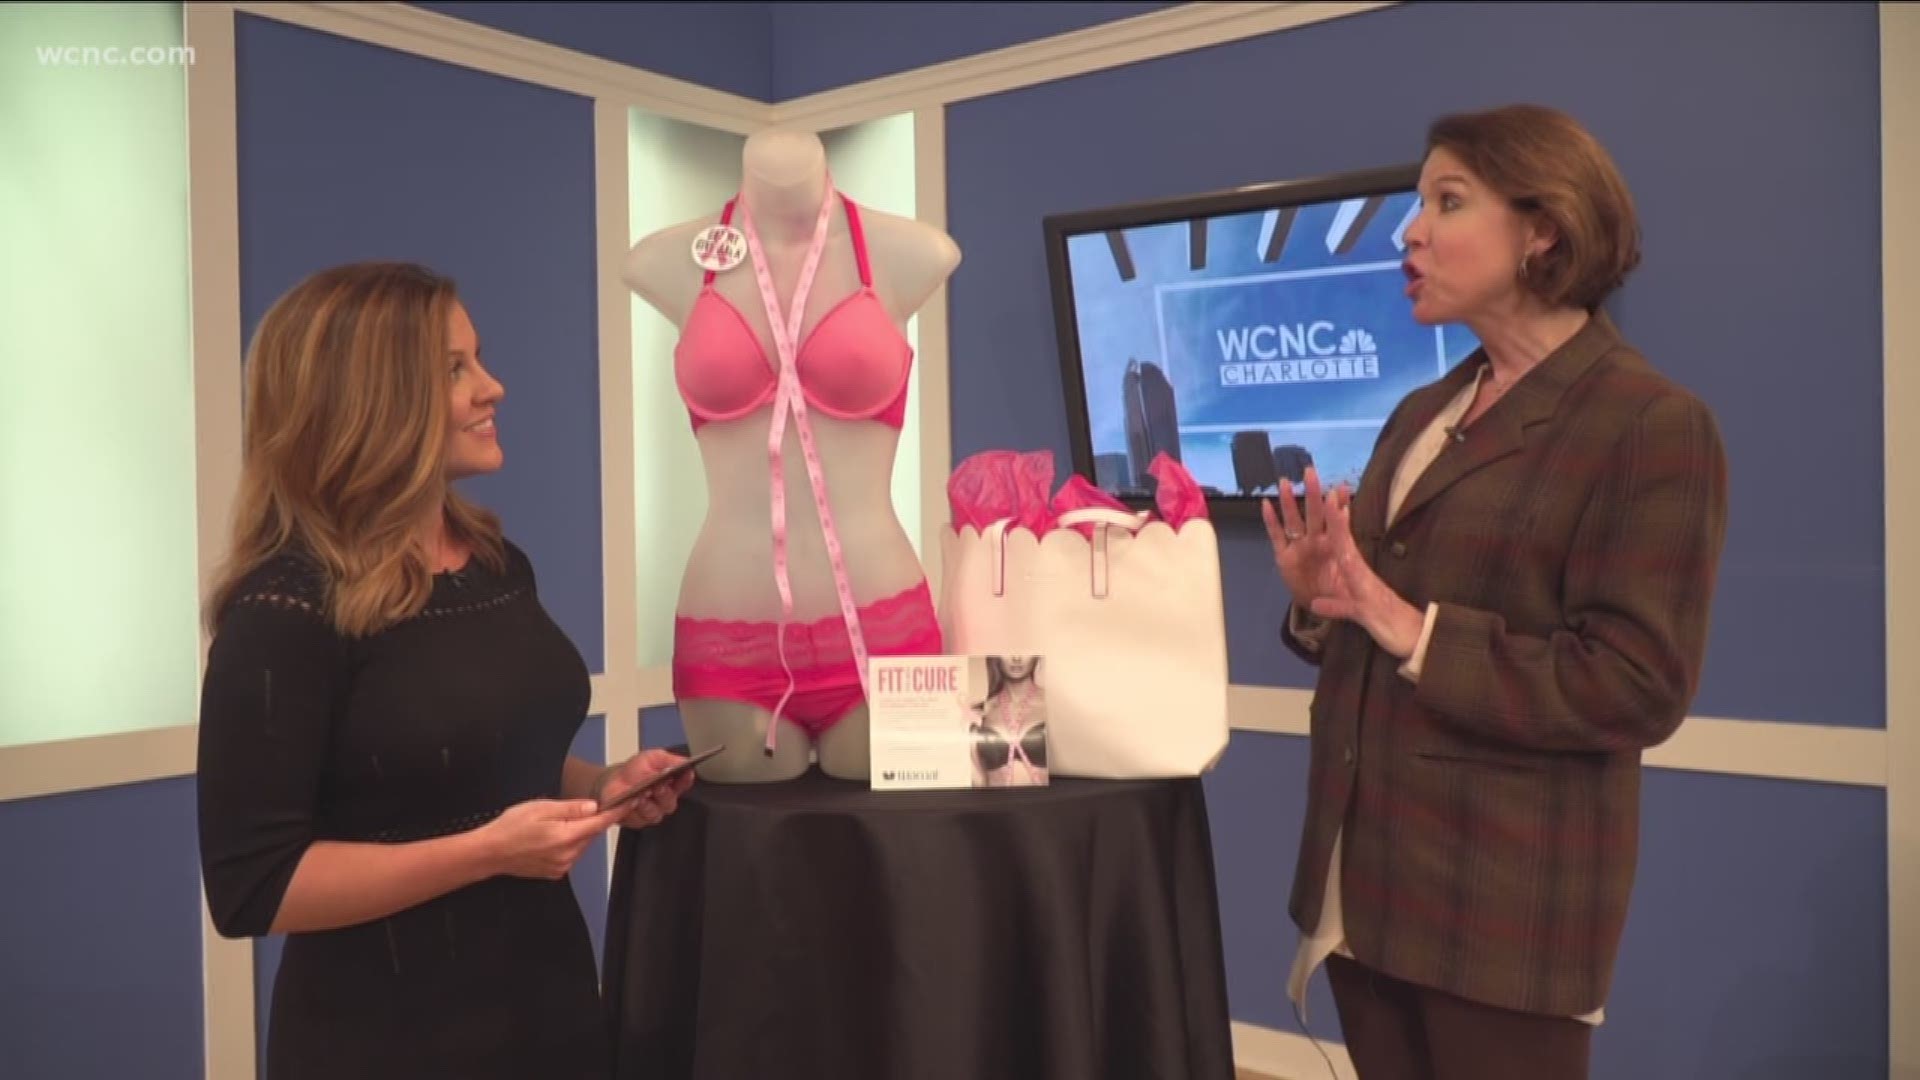 Clothing retailer Belk is partnering with Wacoal to help women get fitted for the correct bra size and put an end to breast cancer.